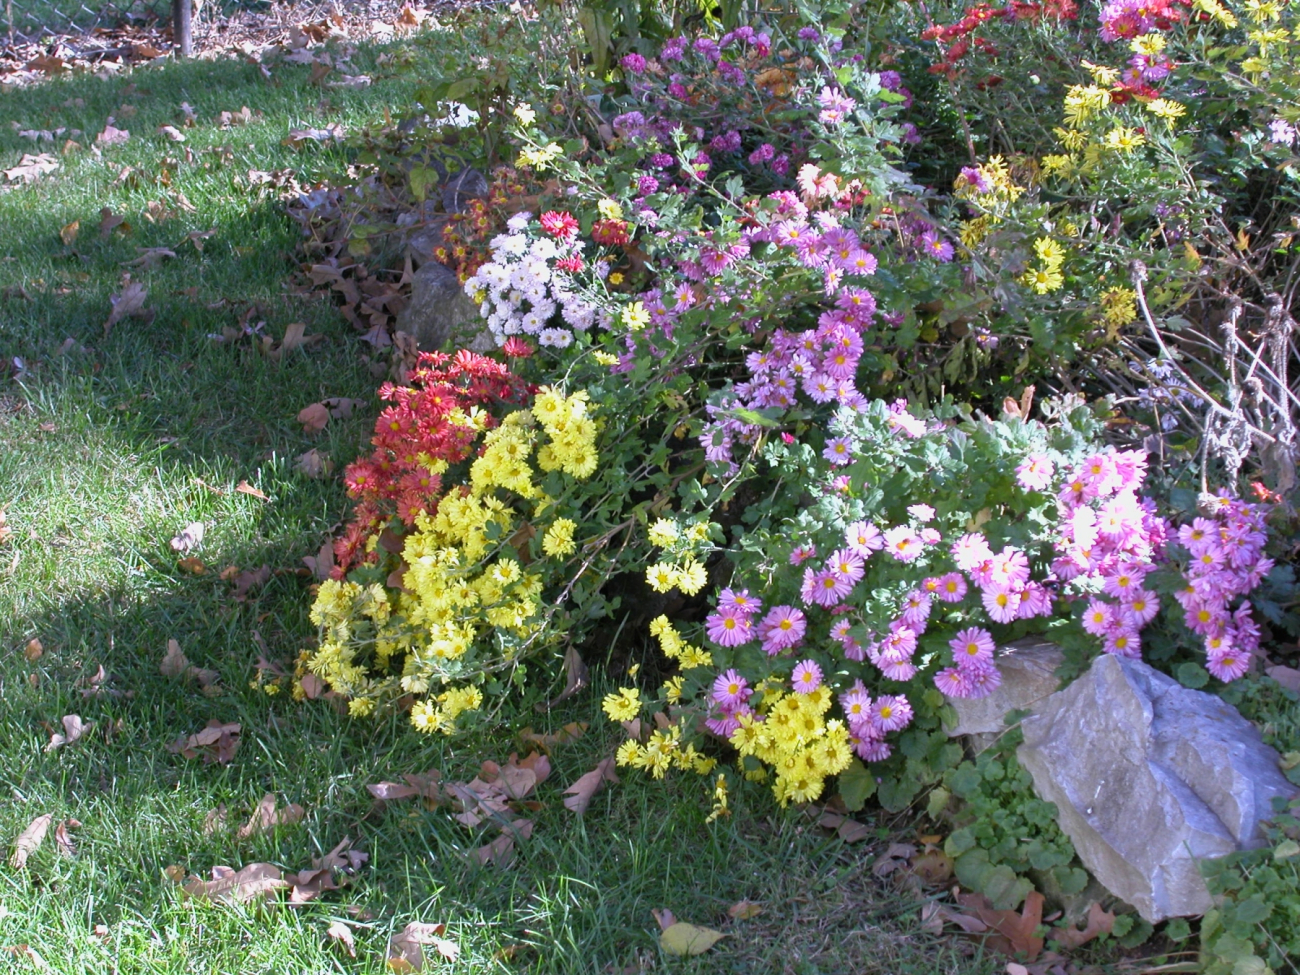 Fall flowers that haven't heard winter is on its way